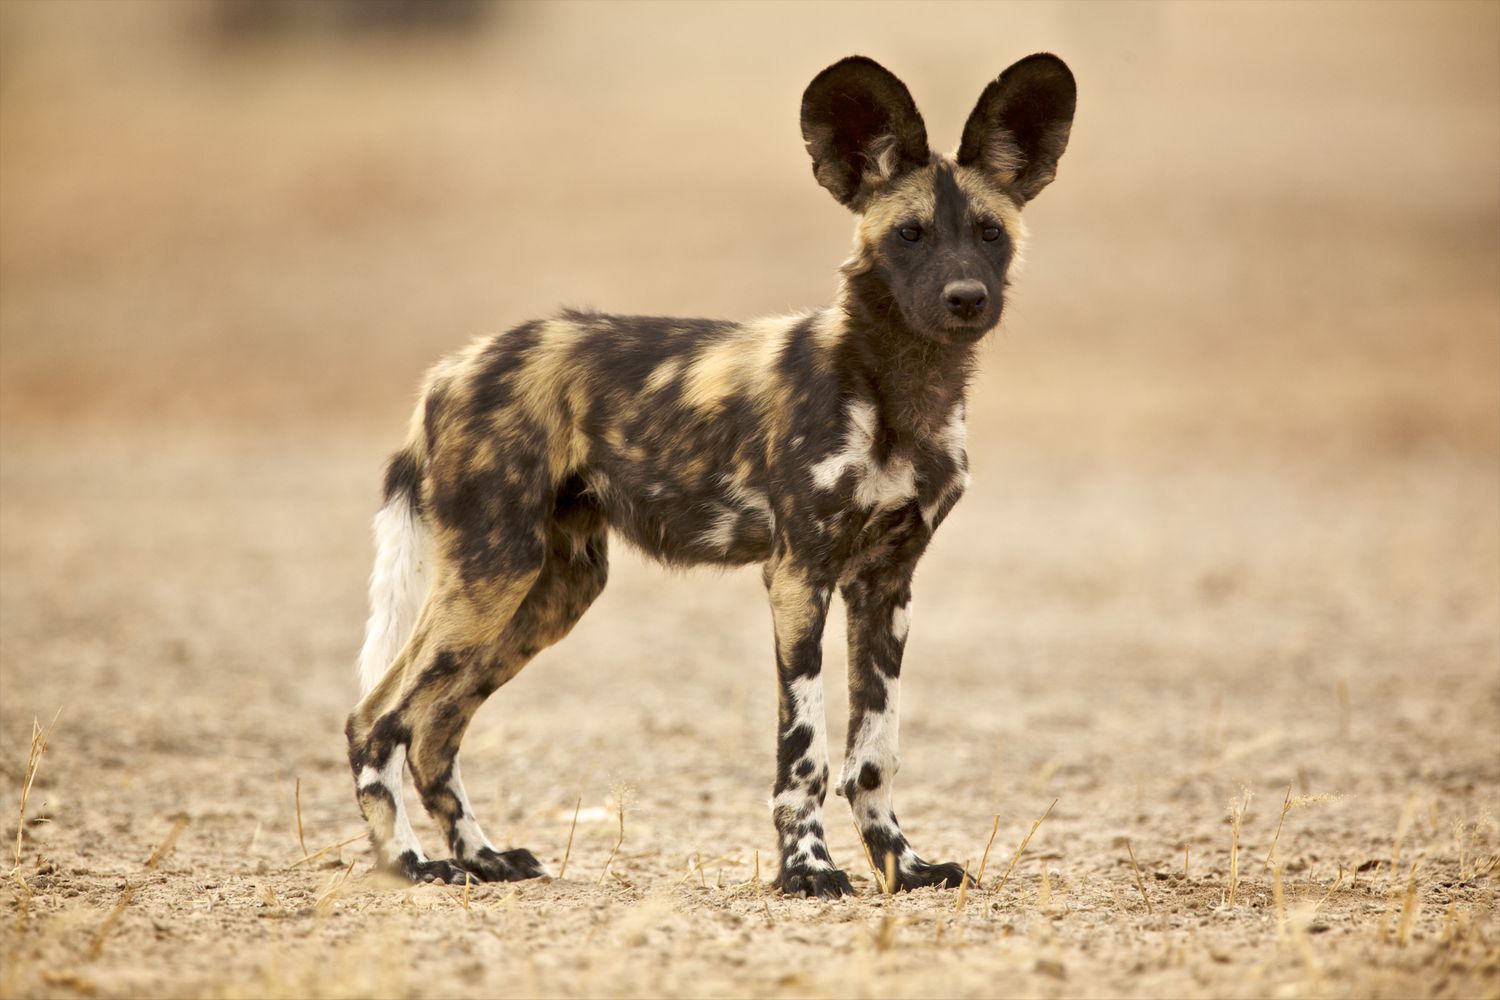 What Sort Of Diet Does The African Wild Dog Have?